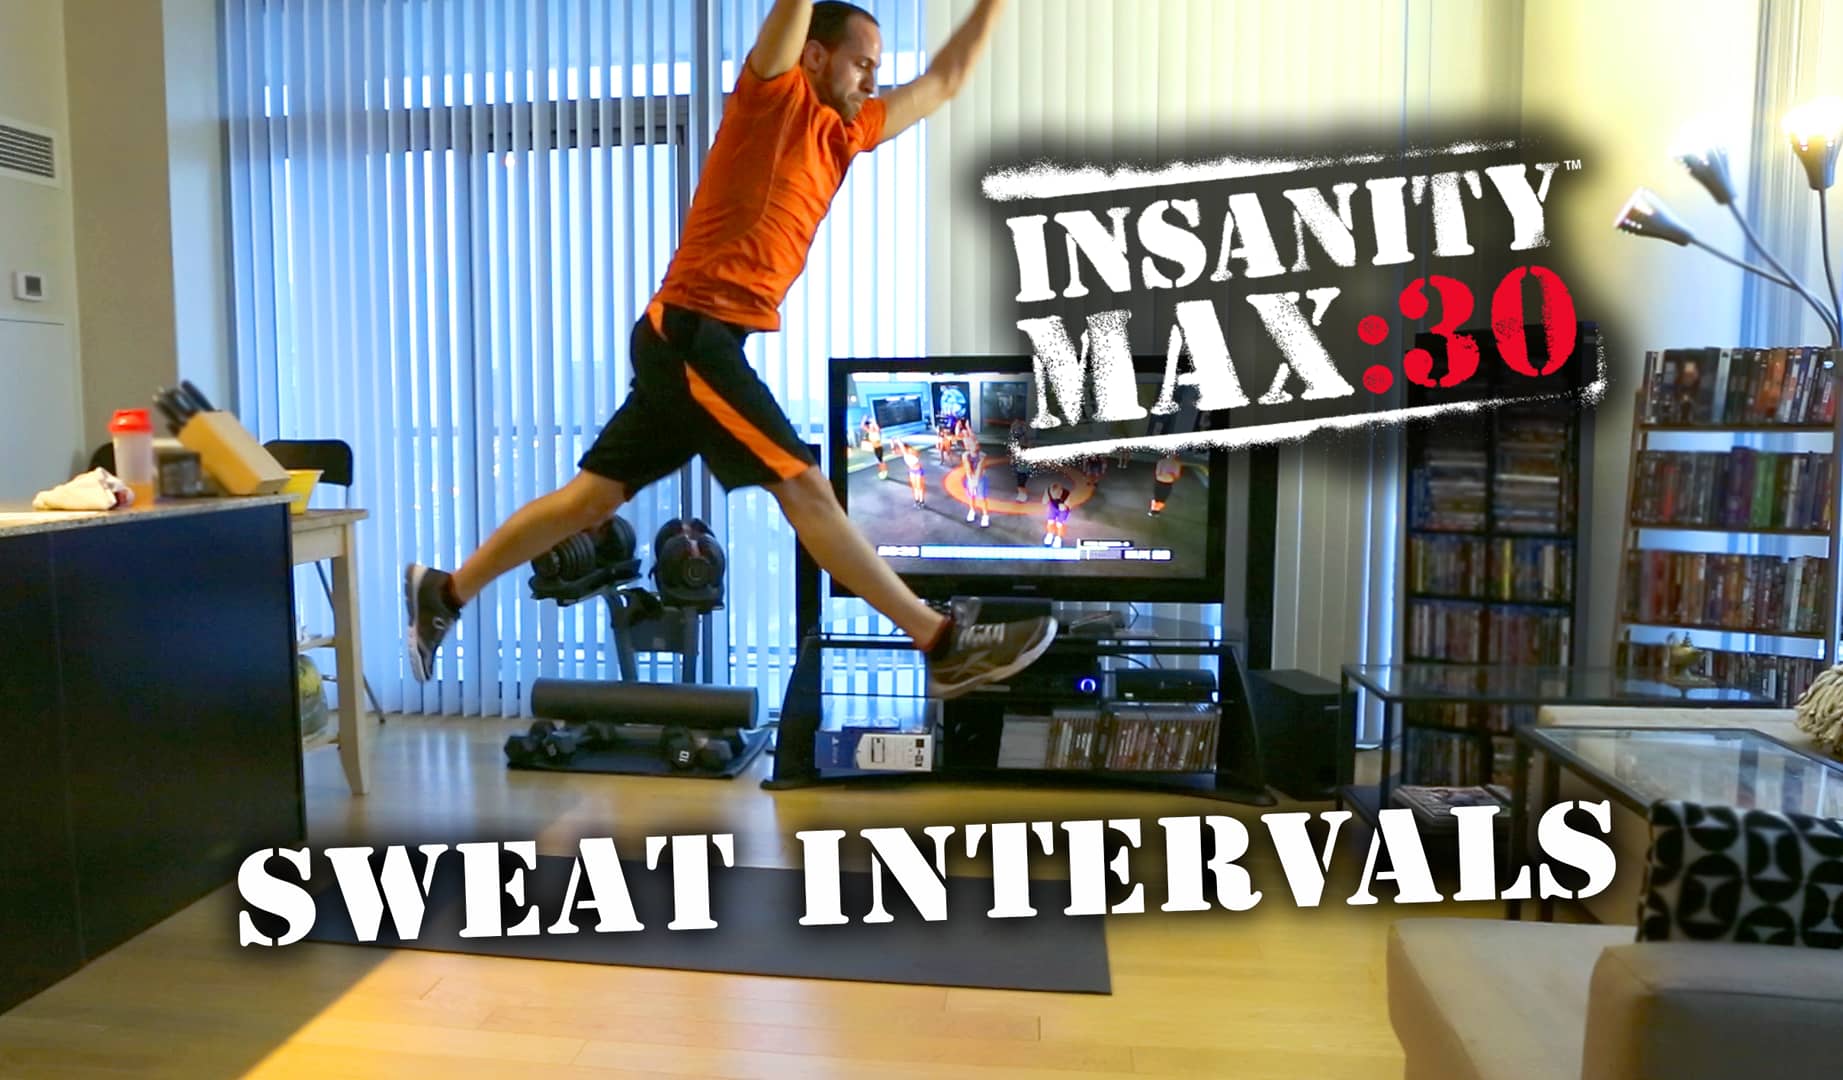 dailymotion insanity max 30 sweat intervals